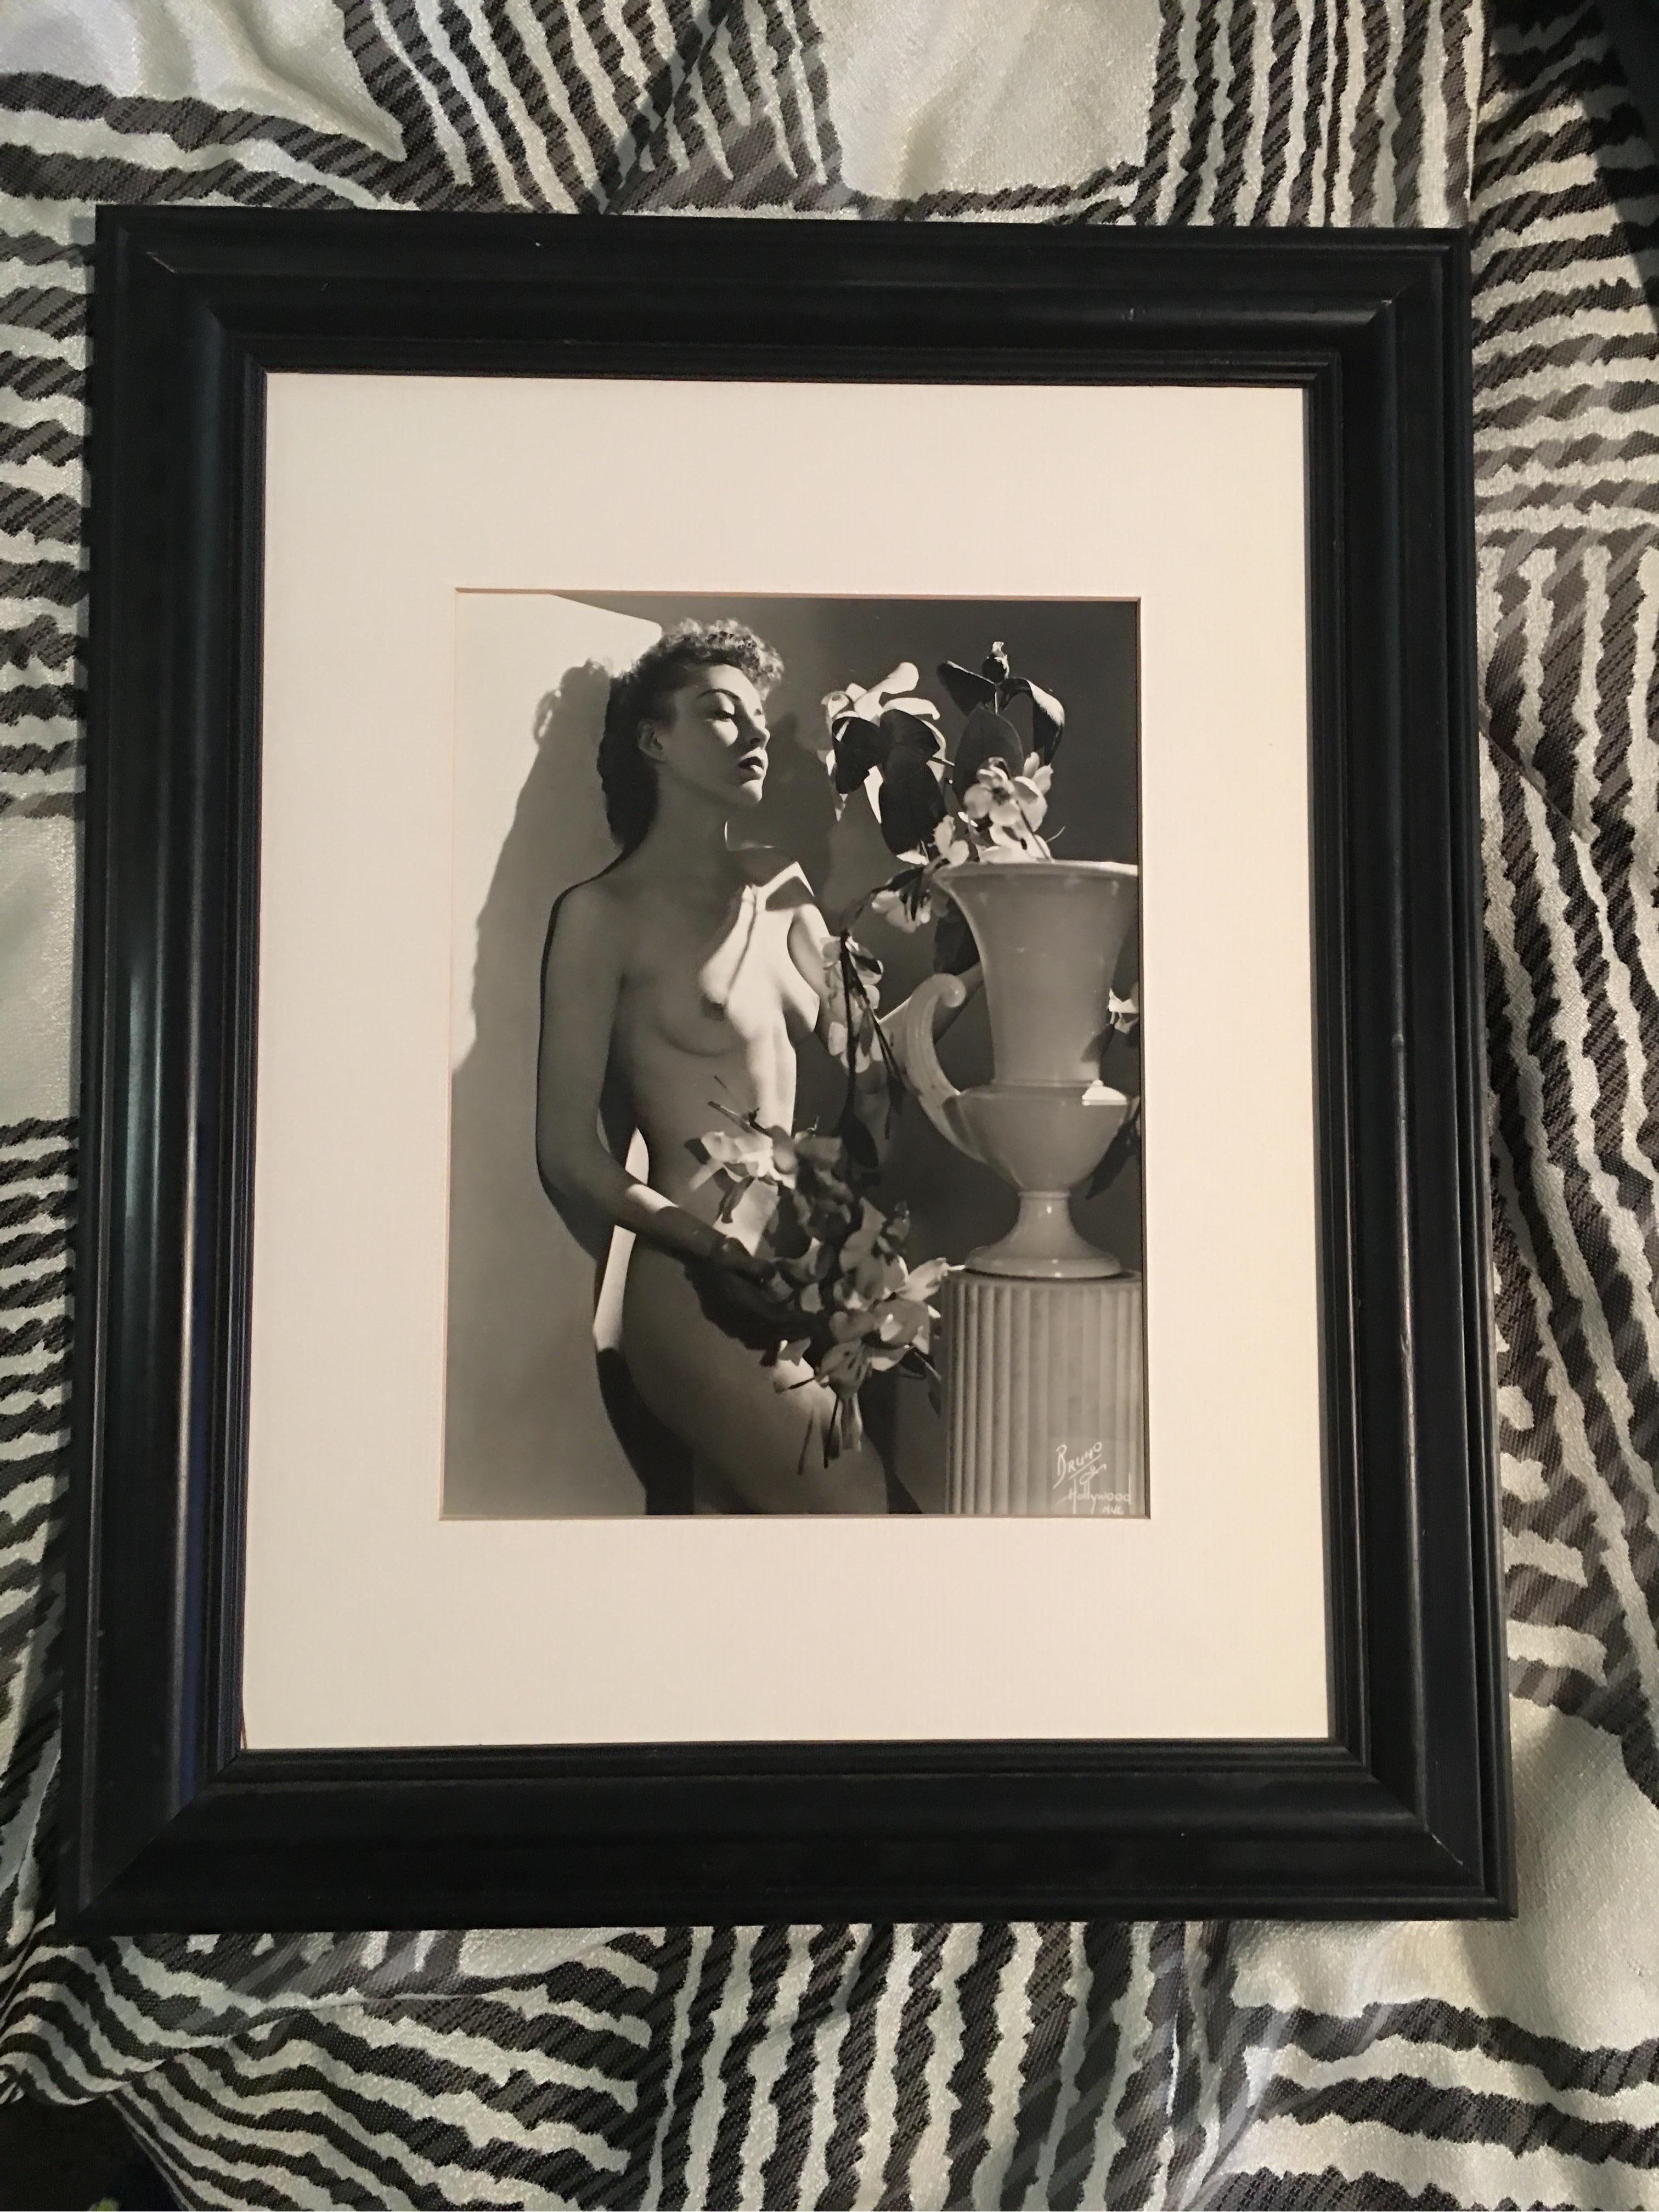 A beautiful mid century modern nude by photographerBruno Bernard aka Bruno of Hollywood. His work is very collectible and hard to find these original prints while he was still alive and printing his own work. The photo is a crisp beautiful